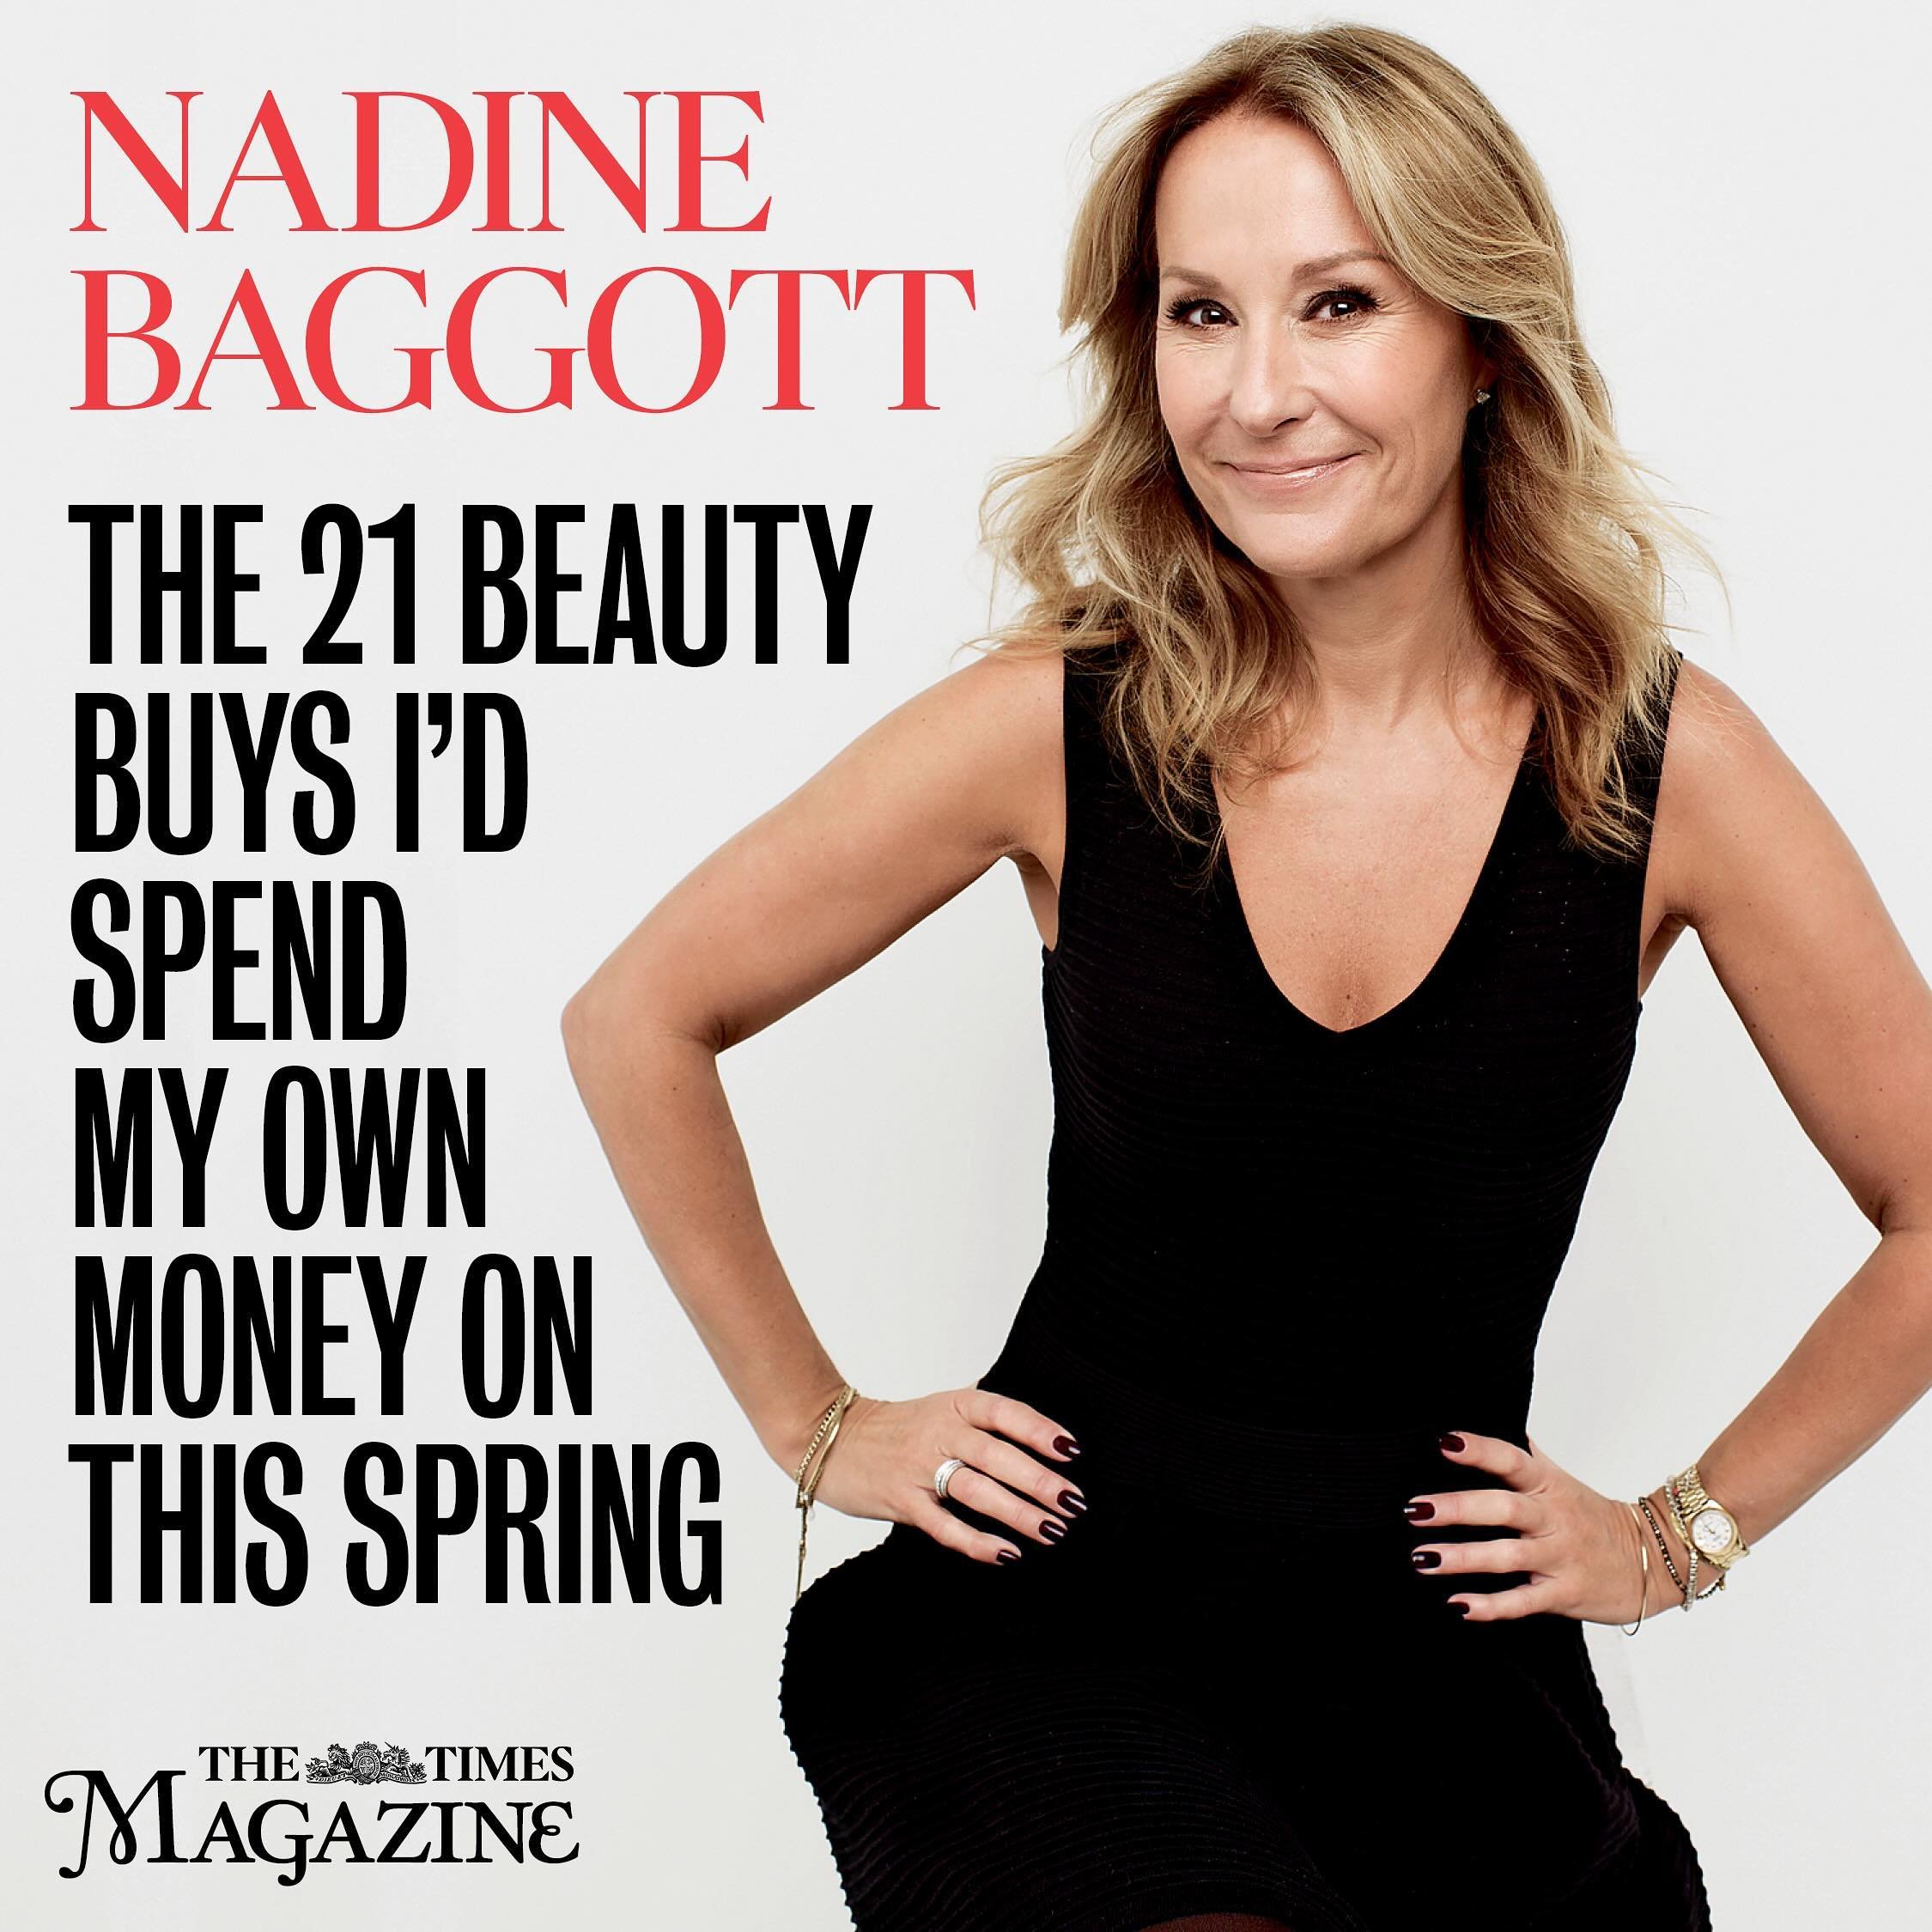 21 New Brilliant Beauty Buys worth your and my money in today&rsquo;s @thetimesmagazine @timesculture 

My honest review of the best buys launching this spring from budget spf/sun filters to the cult face tints and bases, to fool proof cream to powde